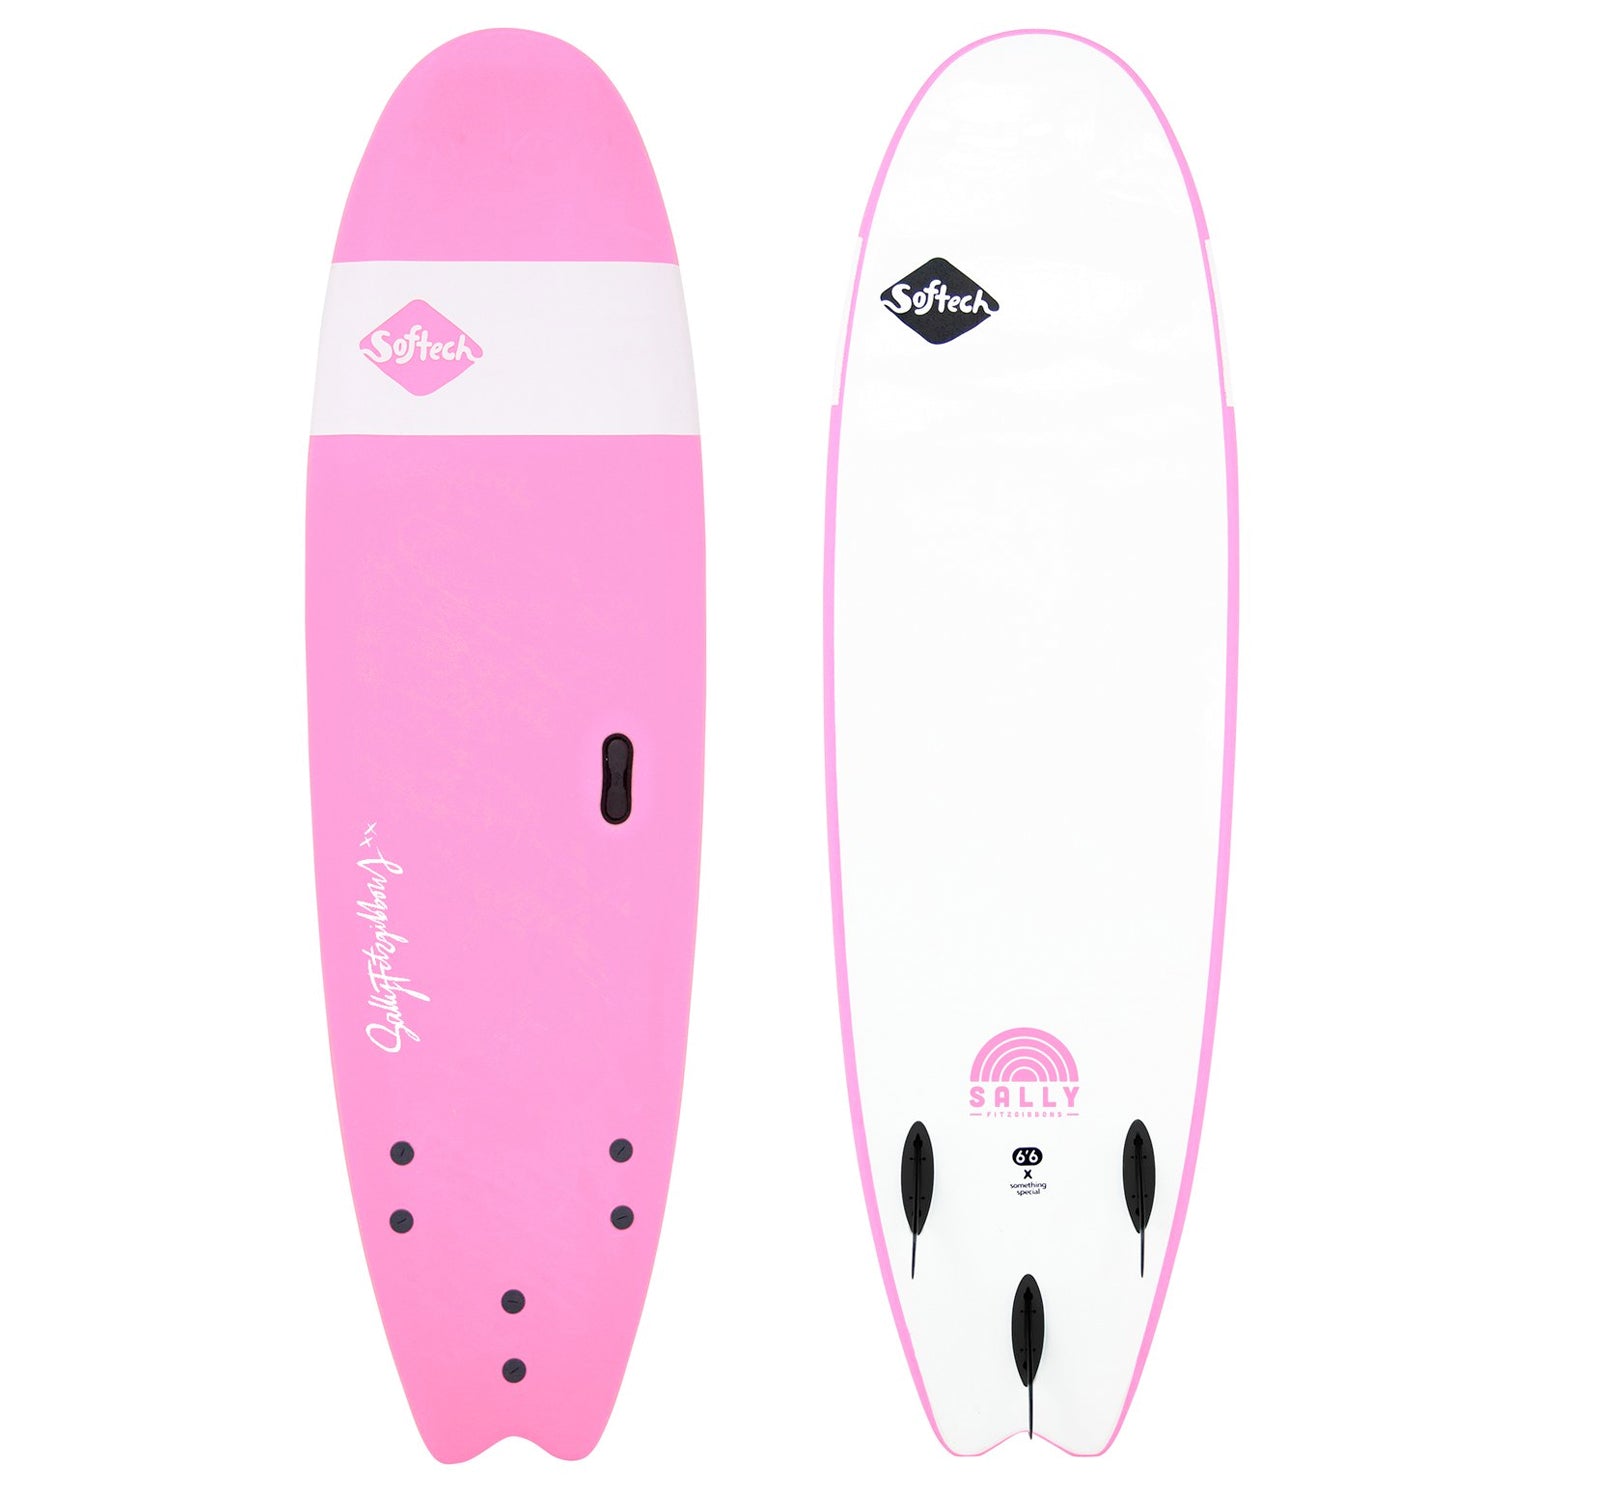 Softech Sally Fitzgibbons Handshaped Soft Surfboard